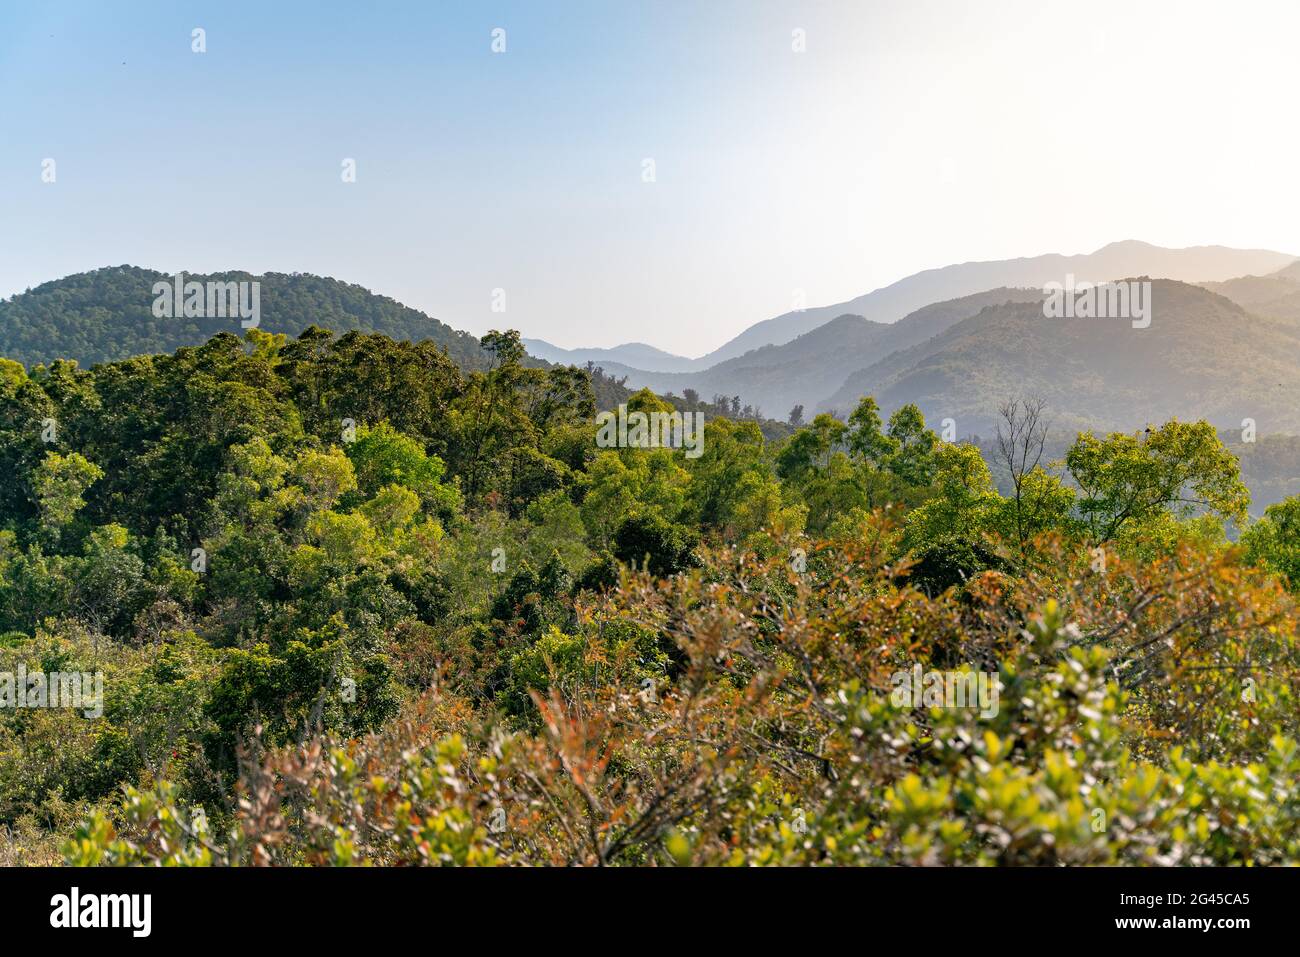 The wondefull view on the tracking path in the Sai Kung East Country Park in Hong Kong Stock Photo